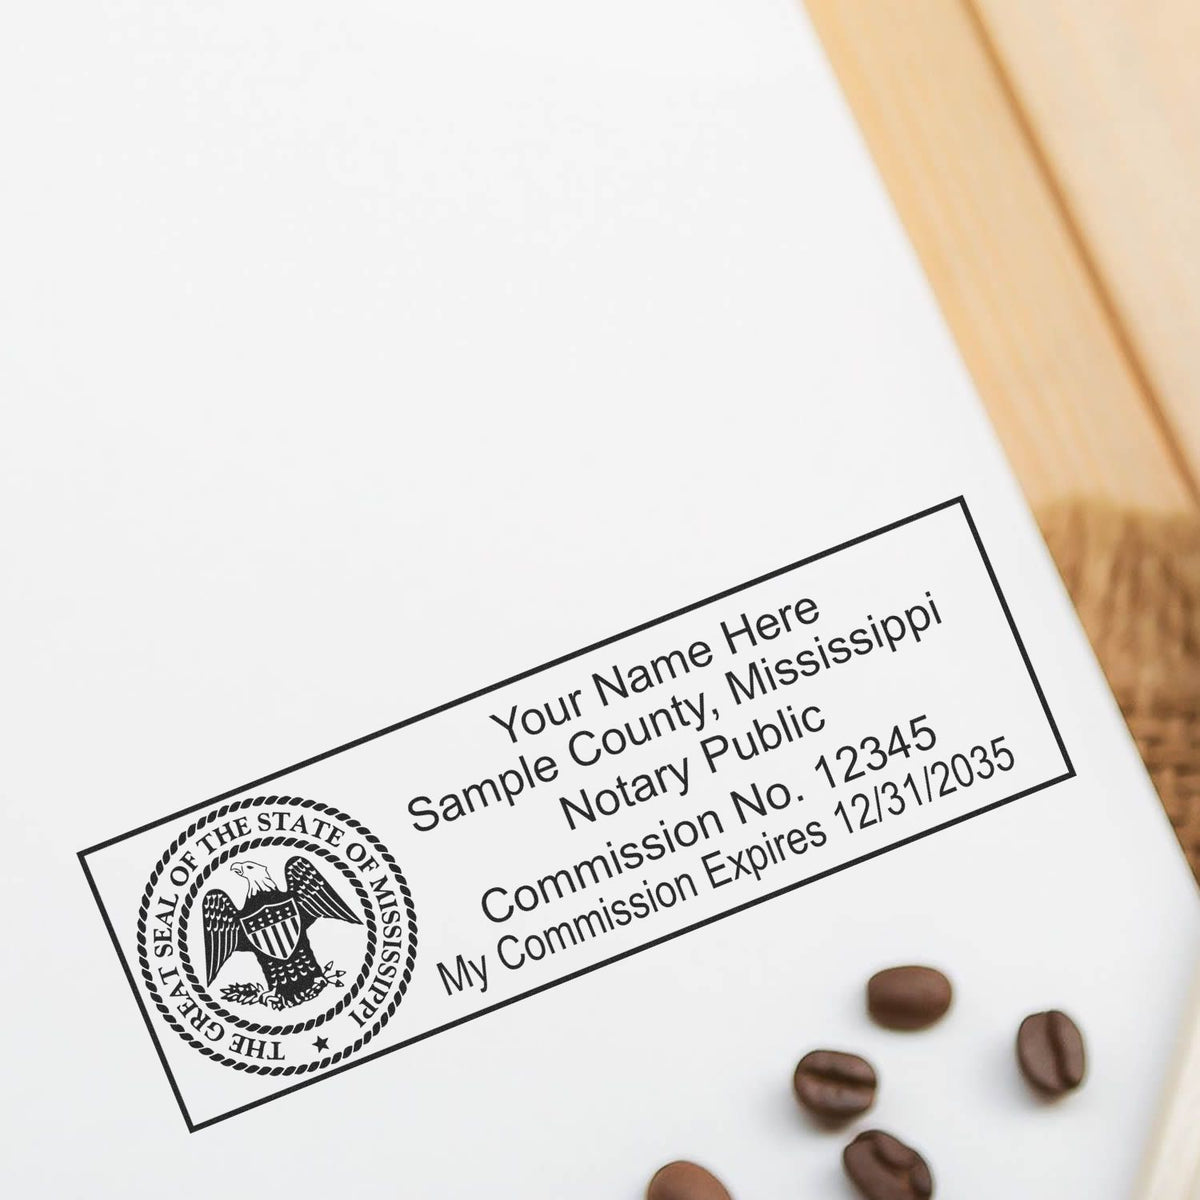 This paper is stamped with a sample imprint of the Super Slim Mississippi Notary Public Stamp, signifying its quality and reliability.